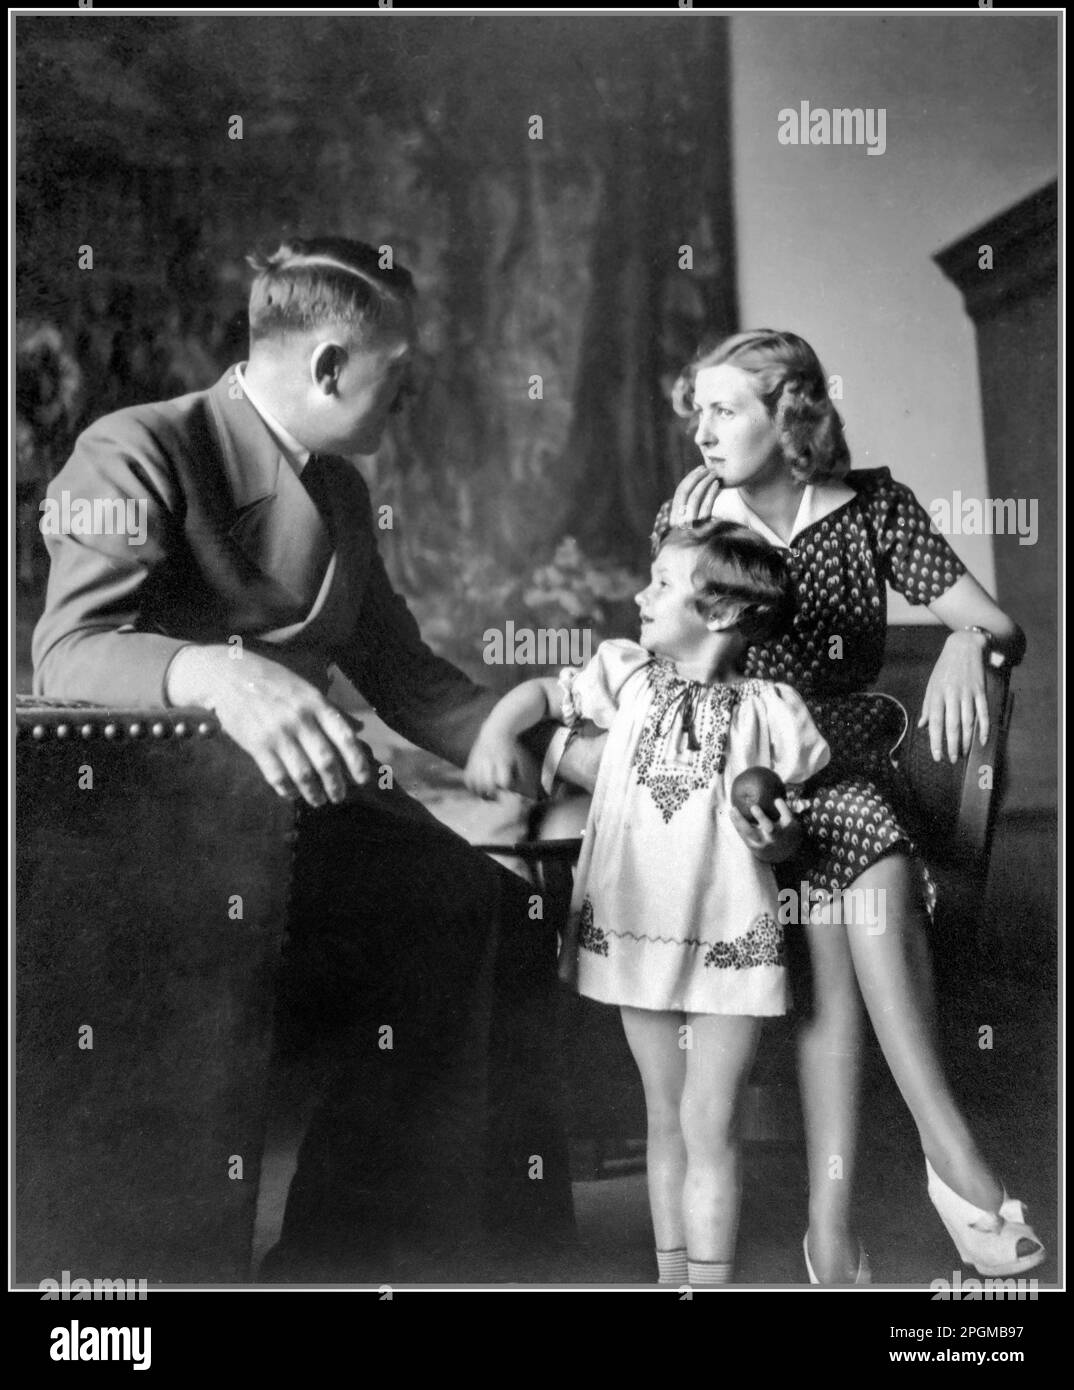 Adolf Hitler with his partner Eva Braun who is aunt to the little girl Ursula, photographed by Hertha Schneider, The Berghof Obersalzberg Nazi Germany 1942 The Photo Albums of Eva Braun Stock Photo